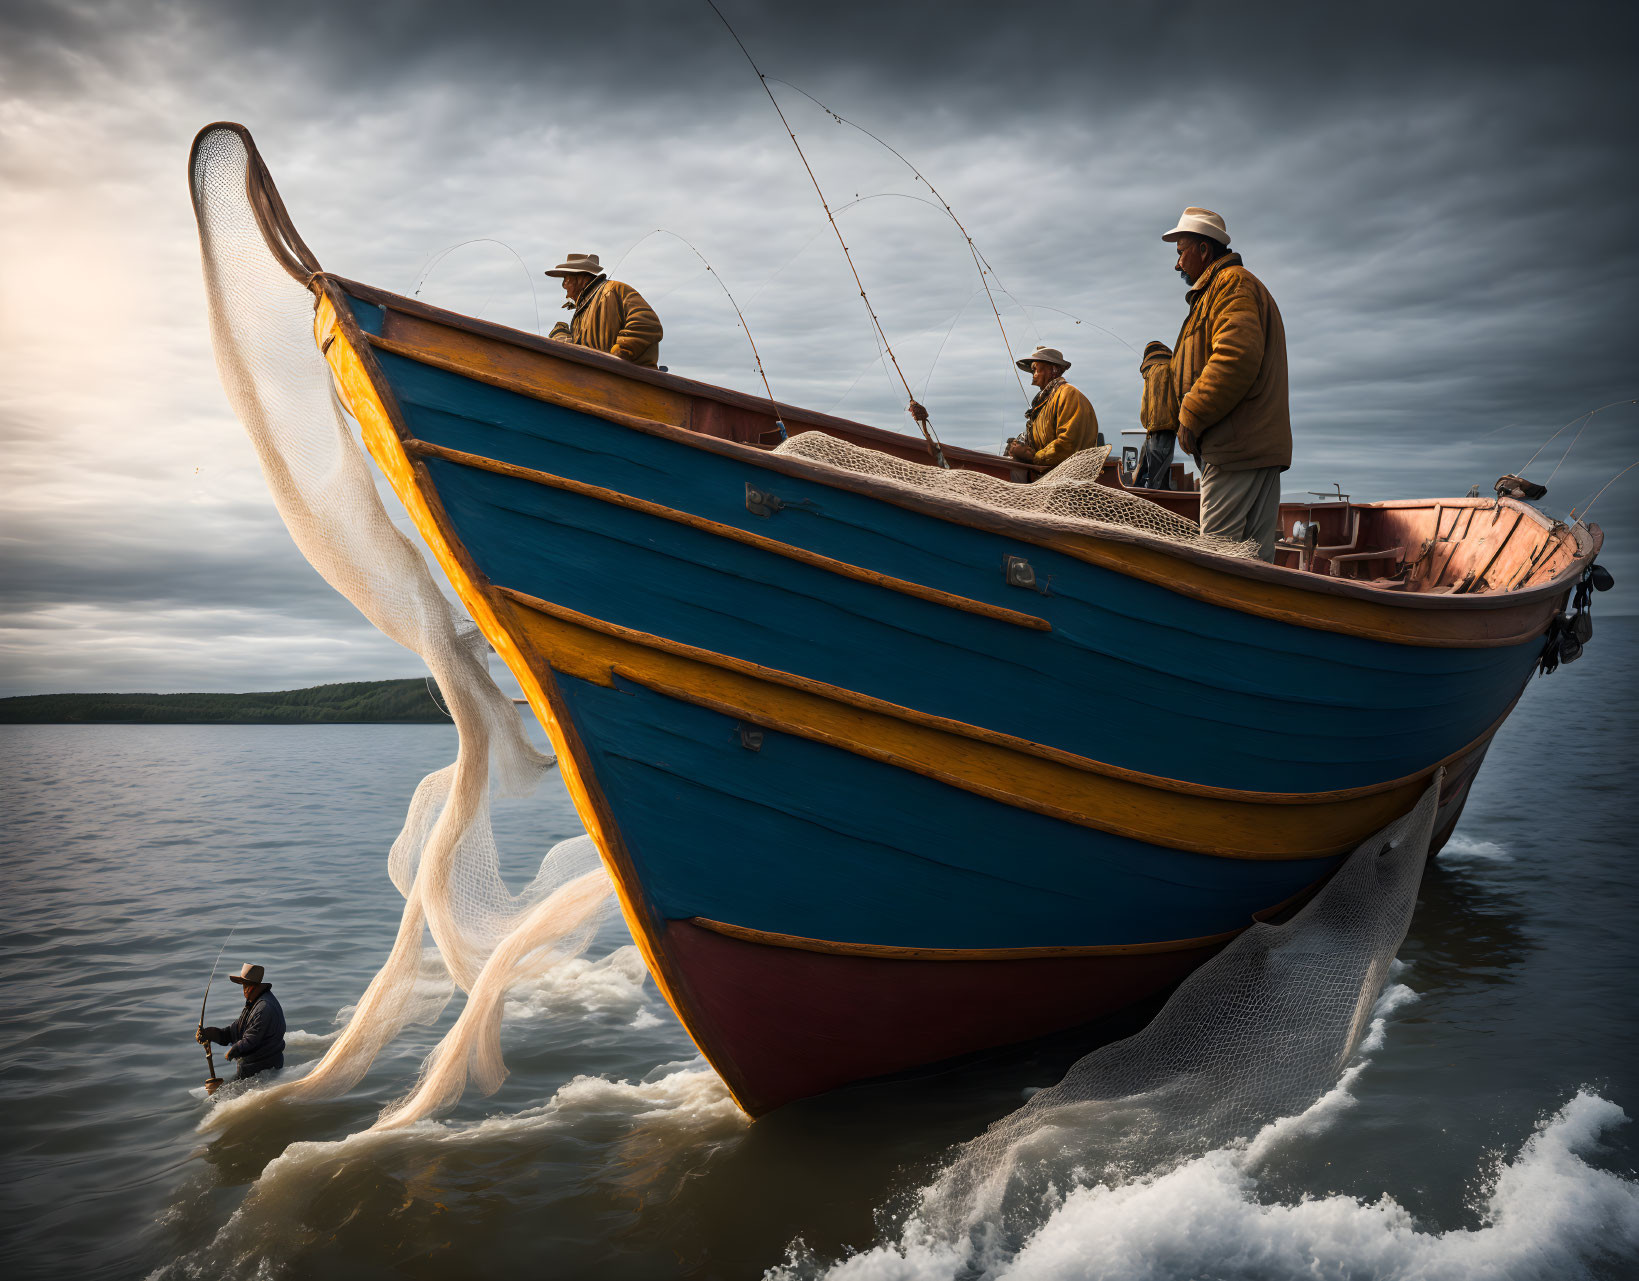 Two fishermen casting a net from a vibrant blue and red boat under a cloudy sky